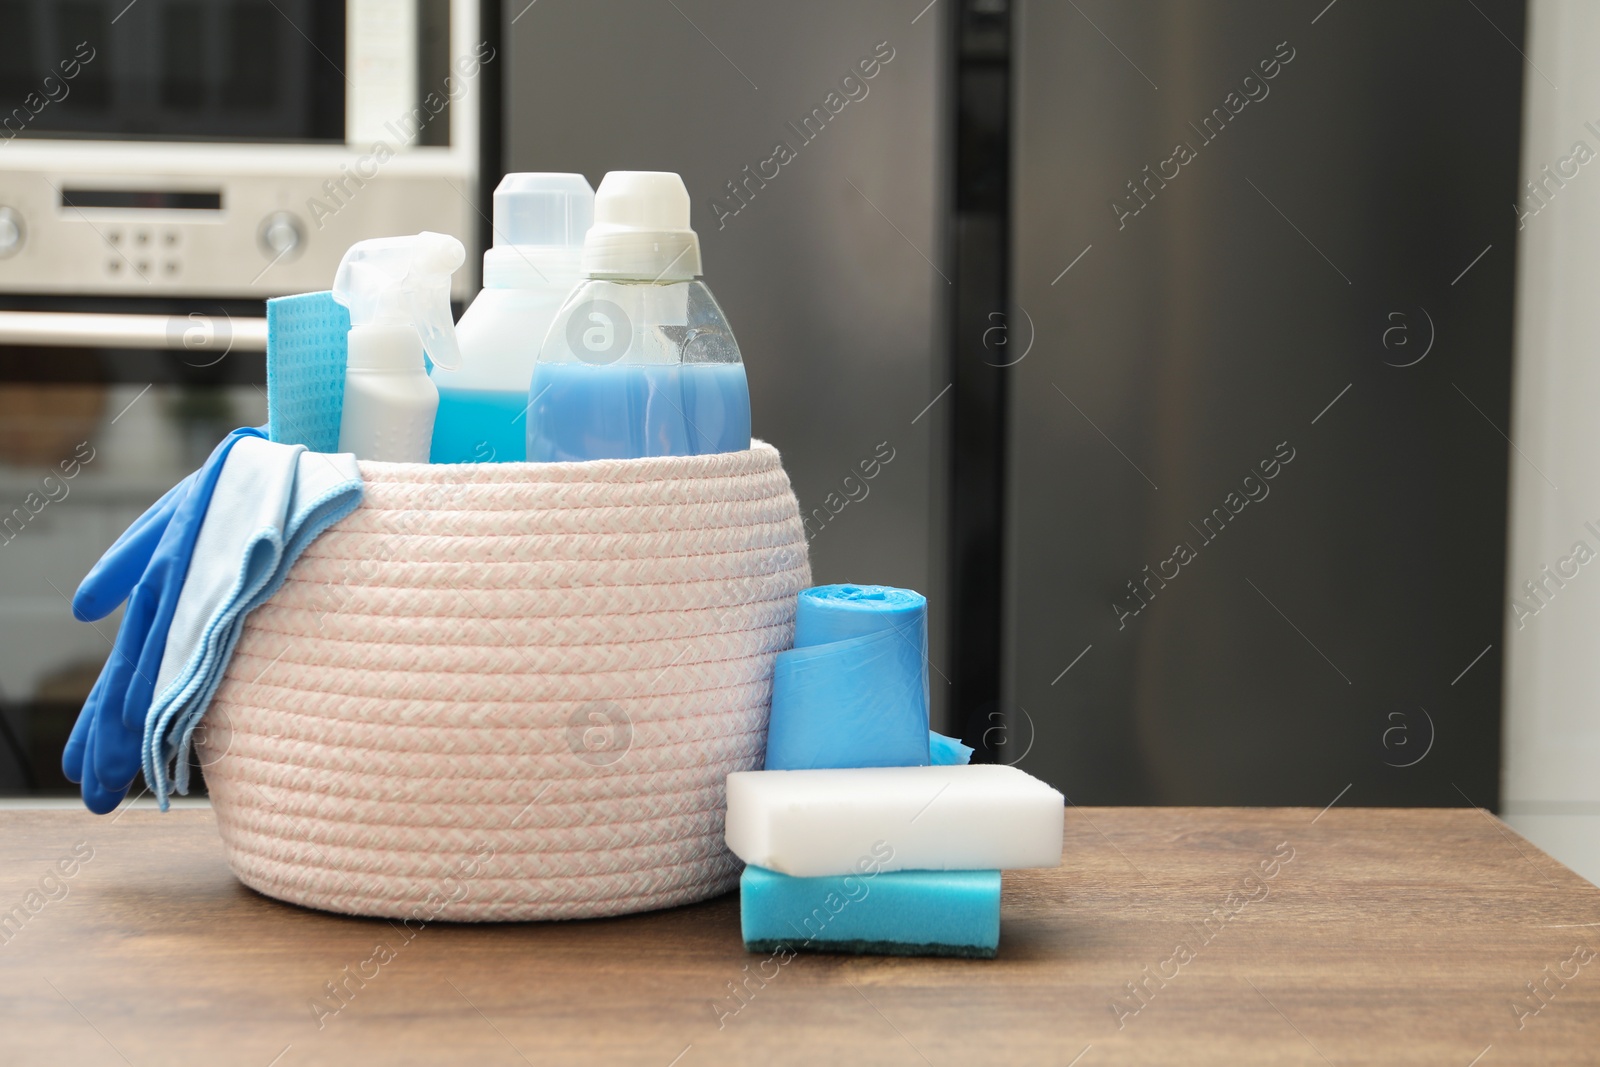 Photo of Different cleaning supplies in basket on table